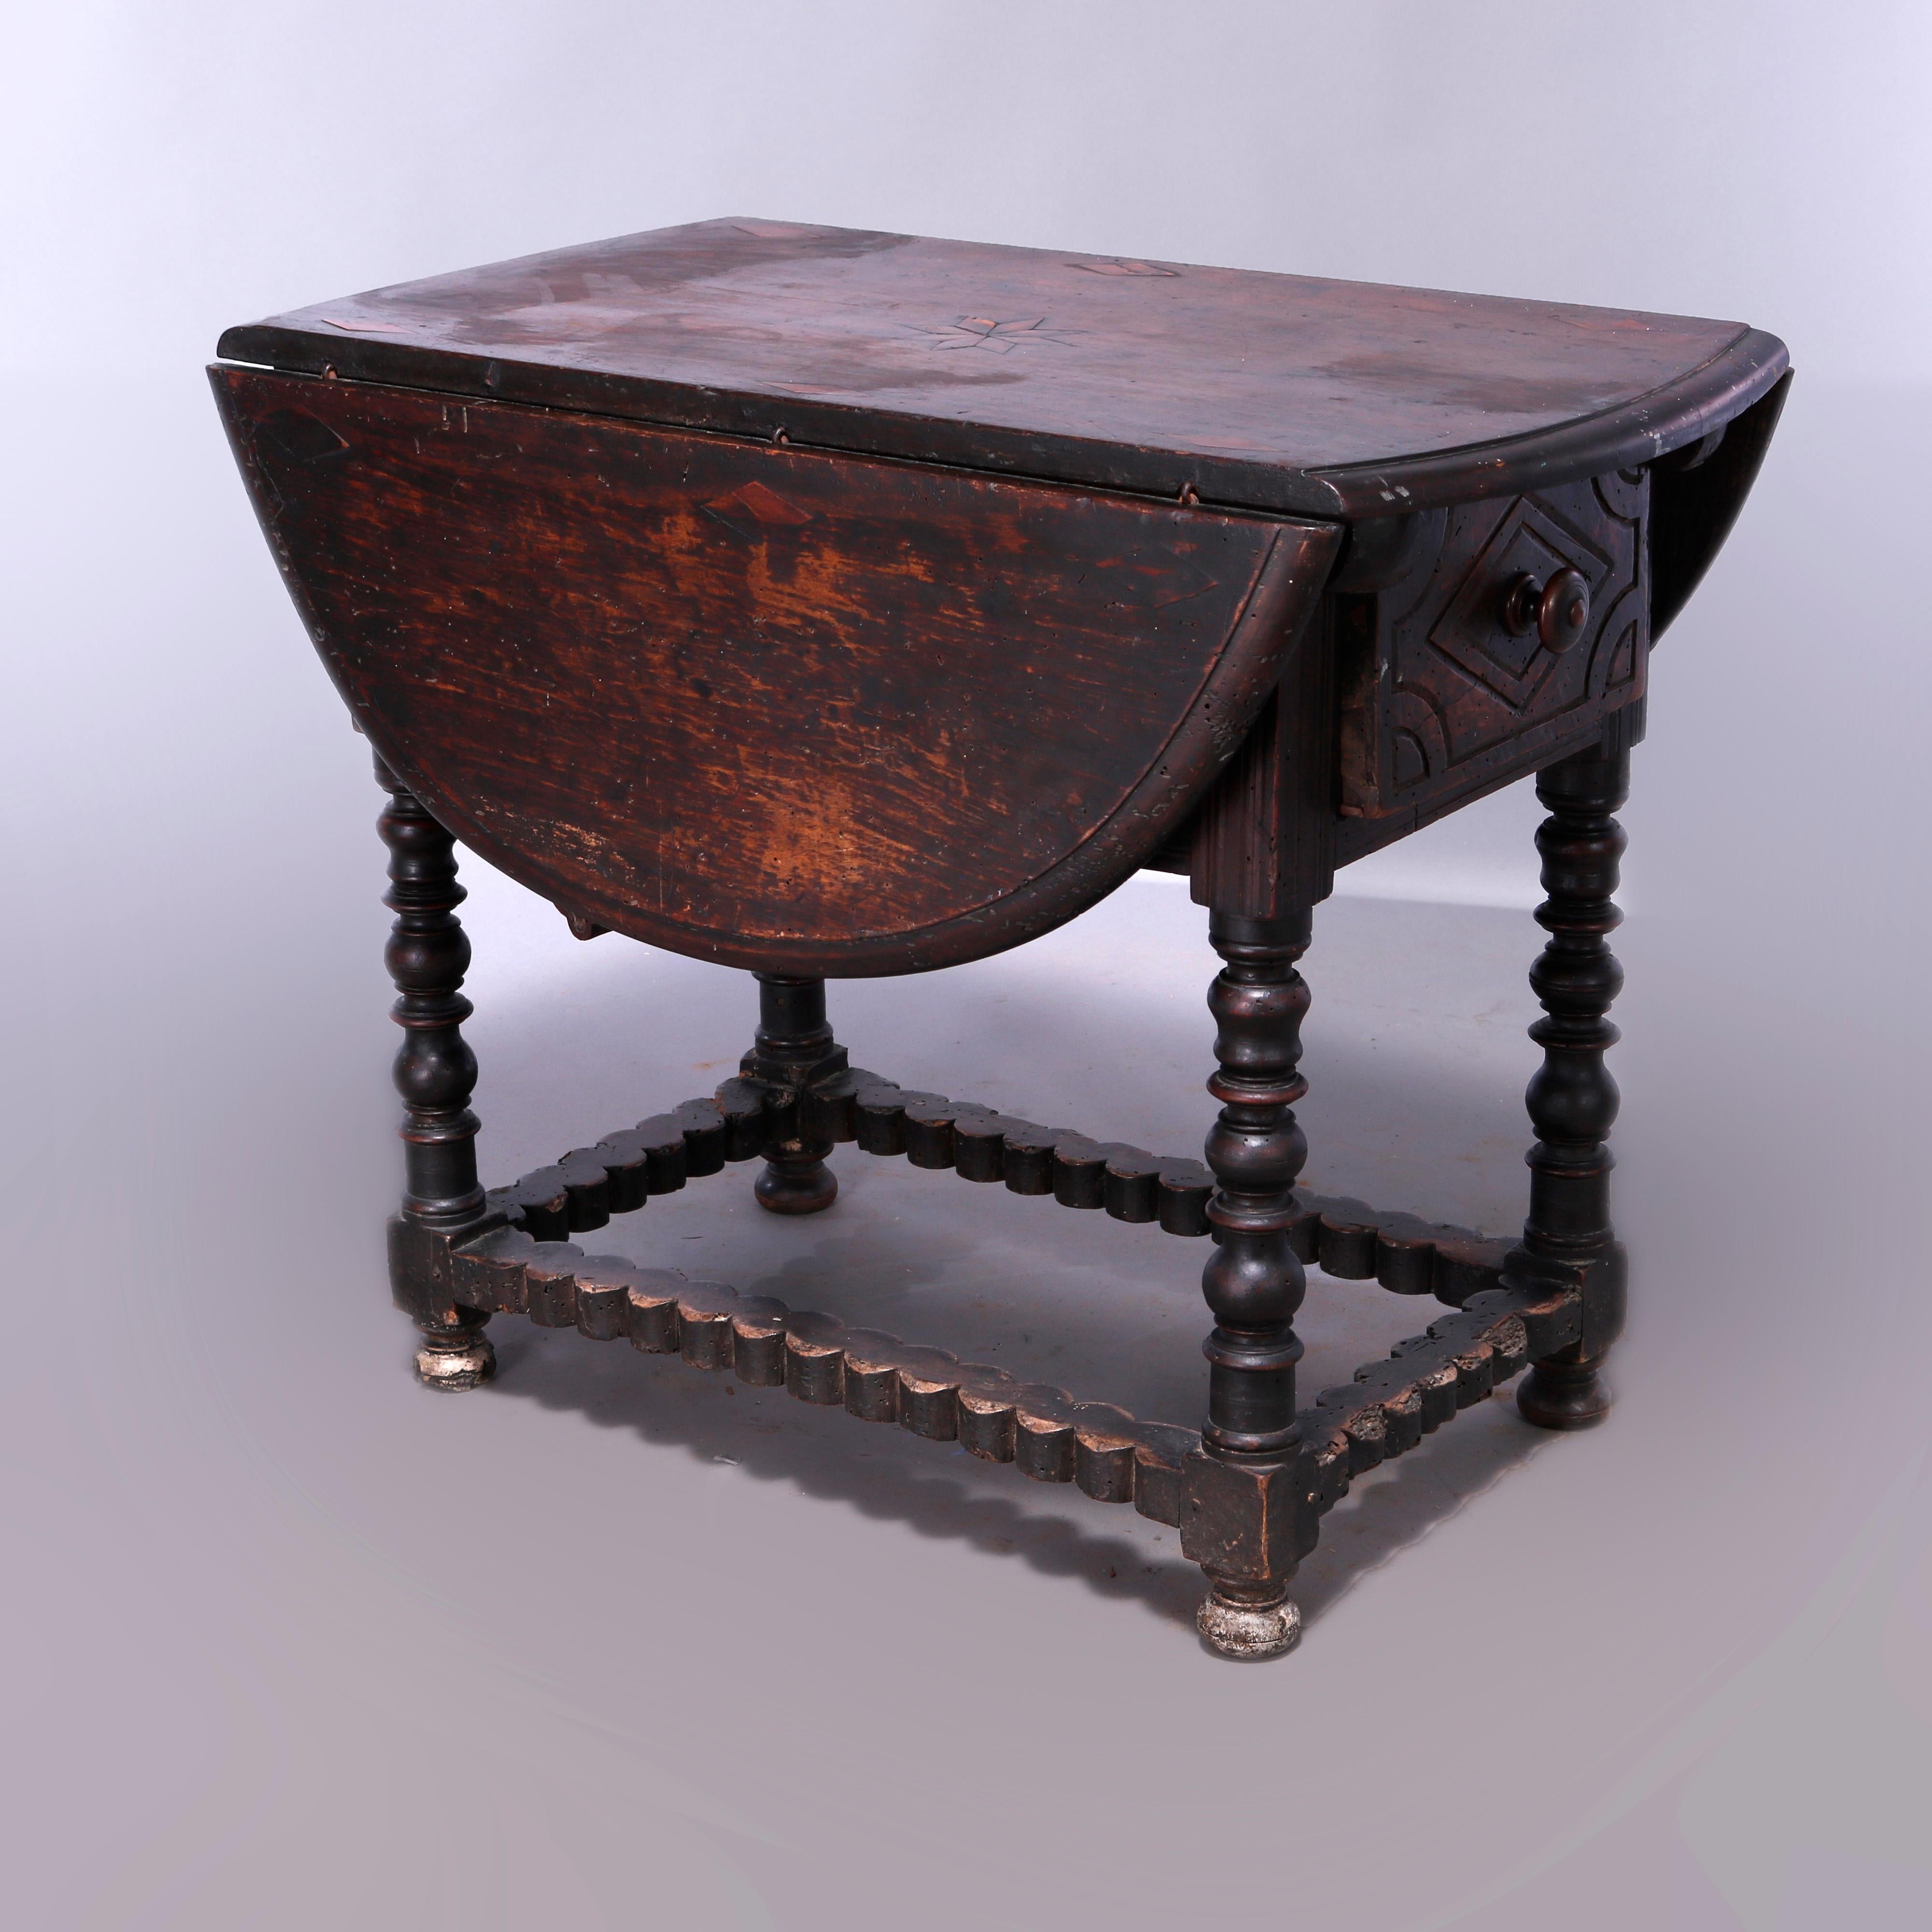 Carved Antique Continental Inlaid Walnut Drop-Leaf Table, 17th Century